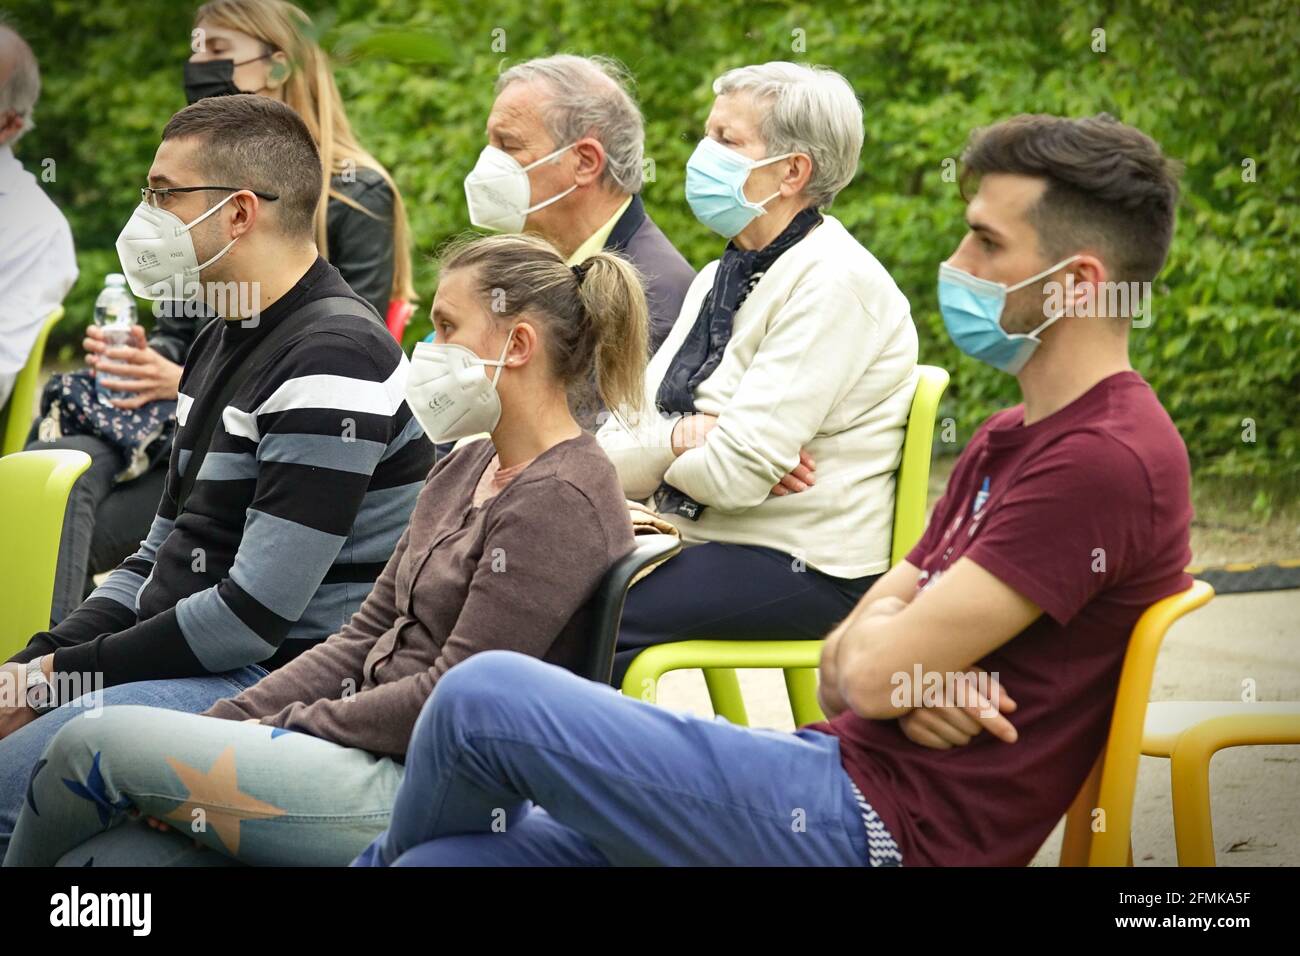 Audience wearing covid masks at first play in an outdoor park for post-pandemic reopening. Milan, Italy - May 2021 Stock Photo